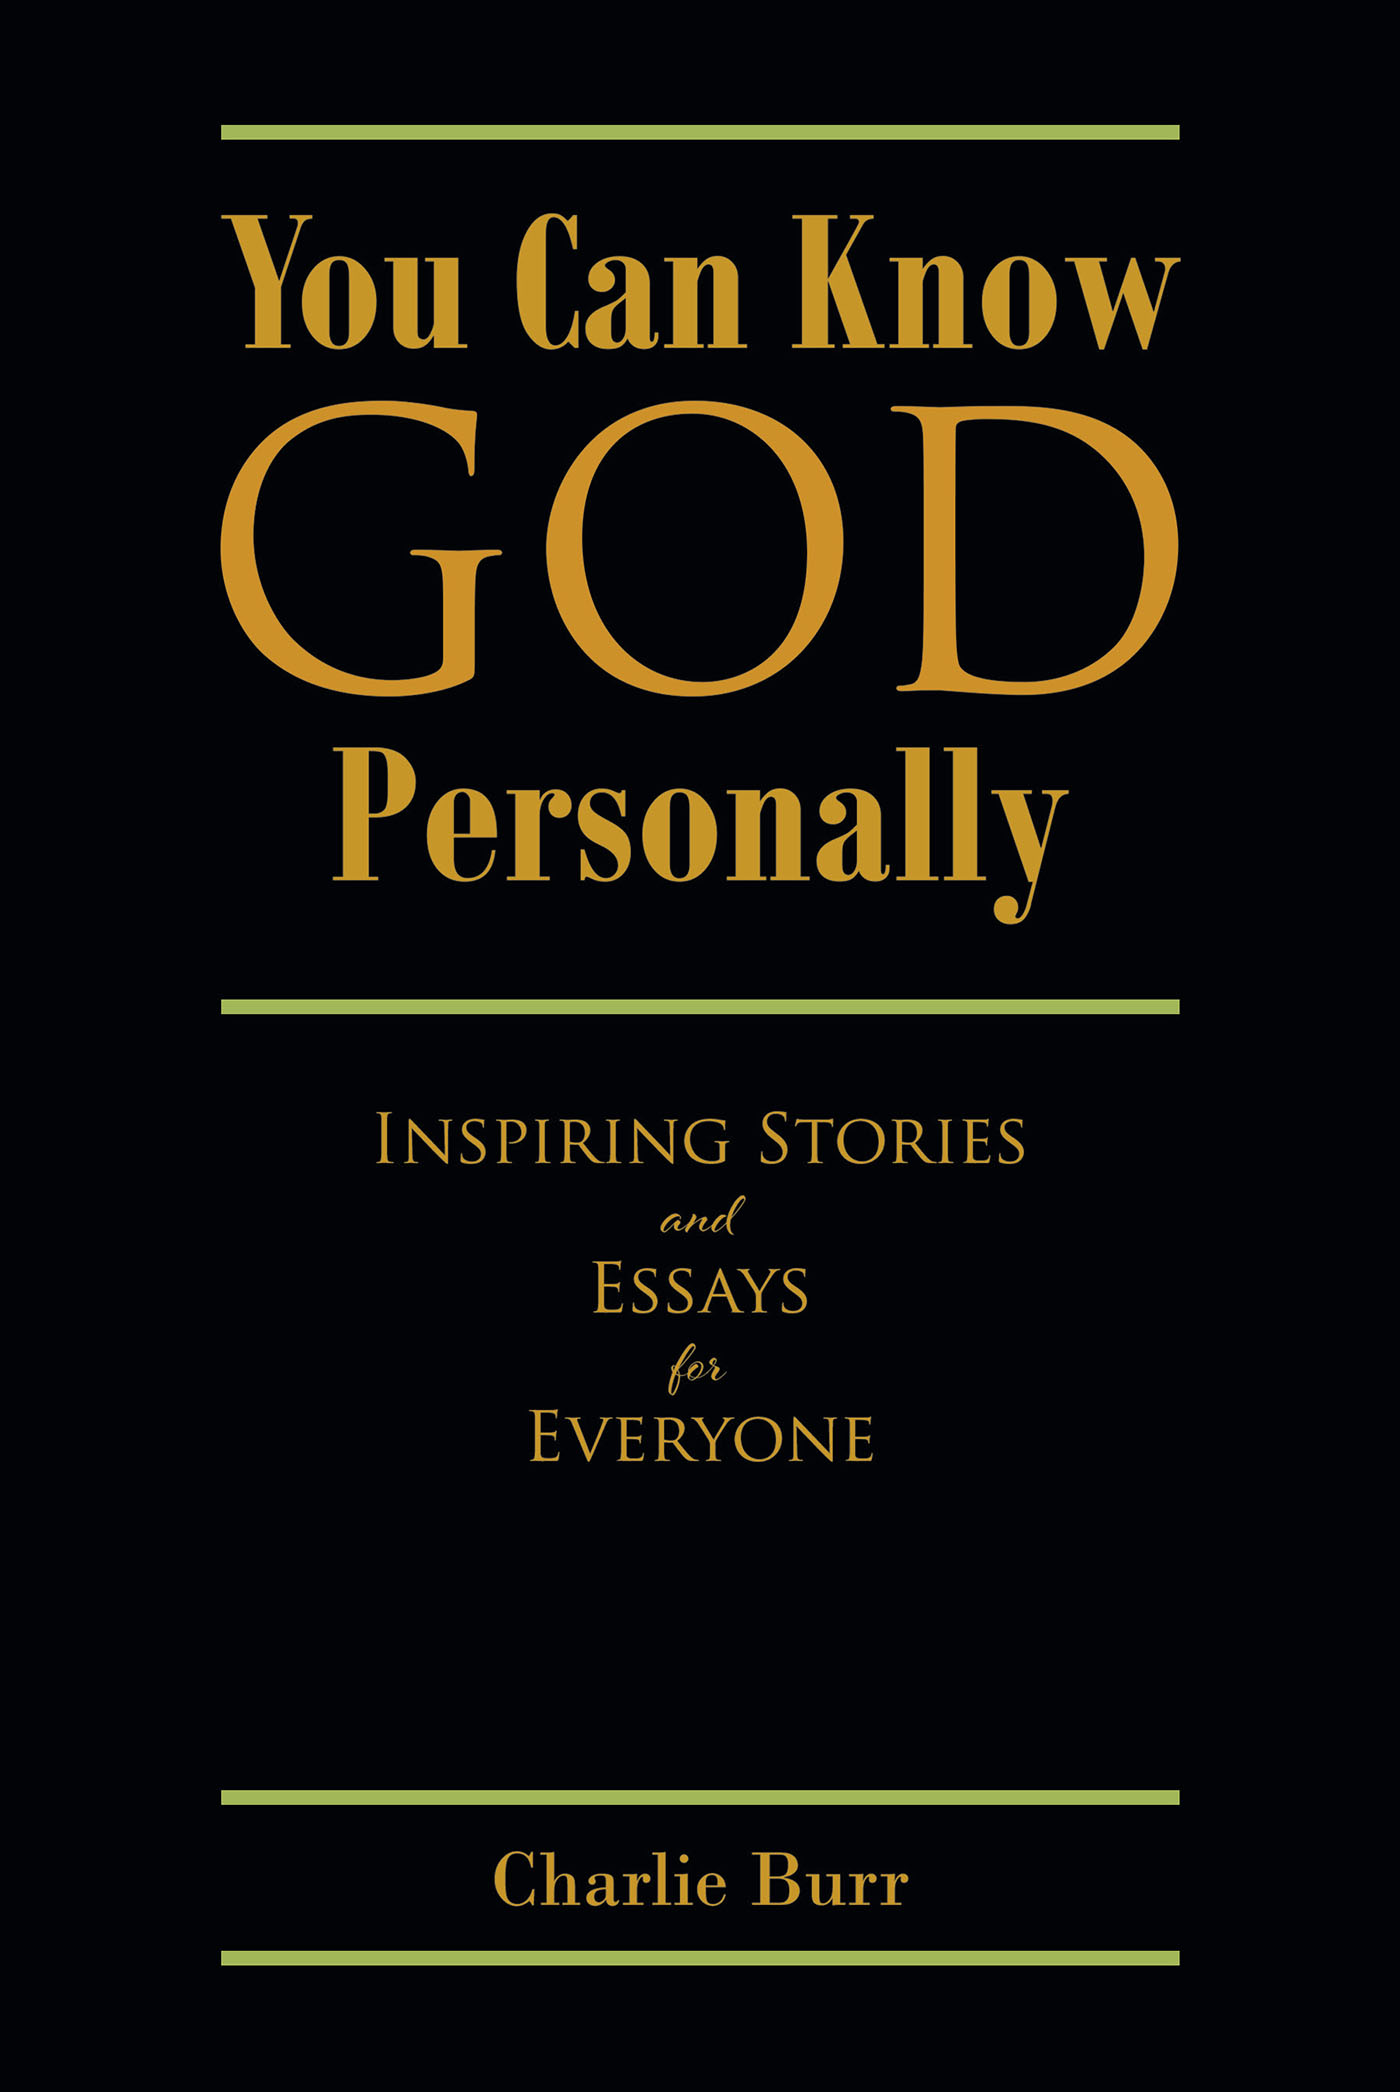 Charlie Burr’s Newly Released "You Can Know God Personally: Inspiring Stories and Essays for Everyone" is a Thought-Provoking Collection of Personal Reflections